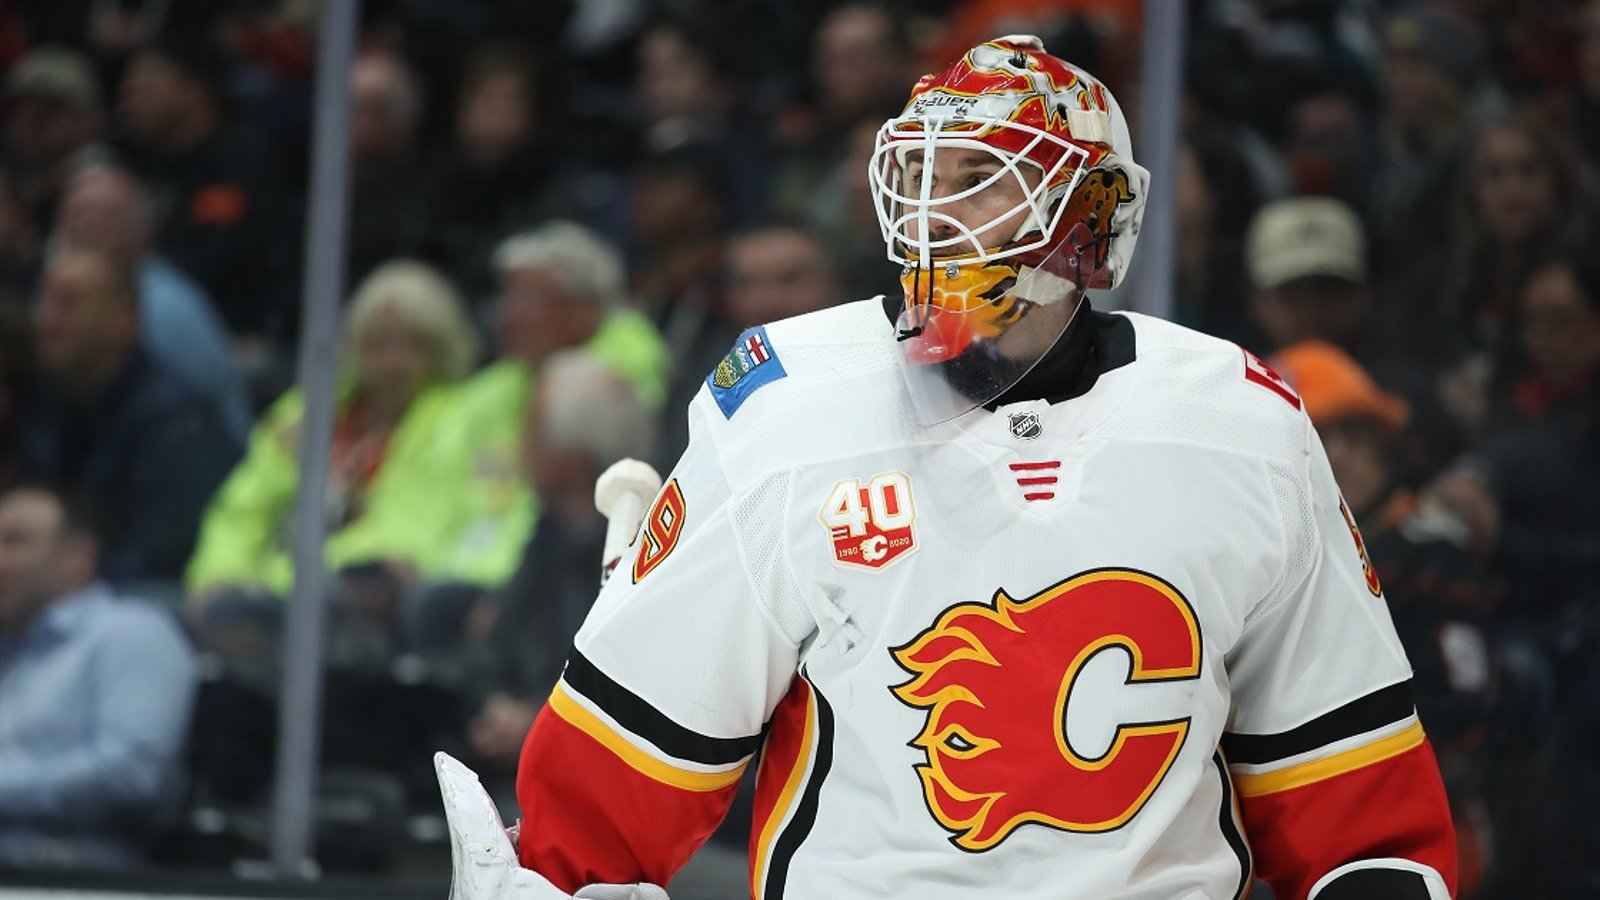 Flames appear to have picked their starting goaltender.